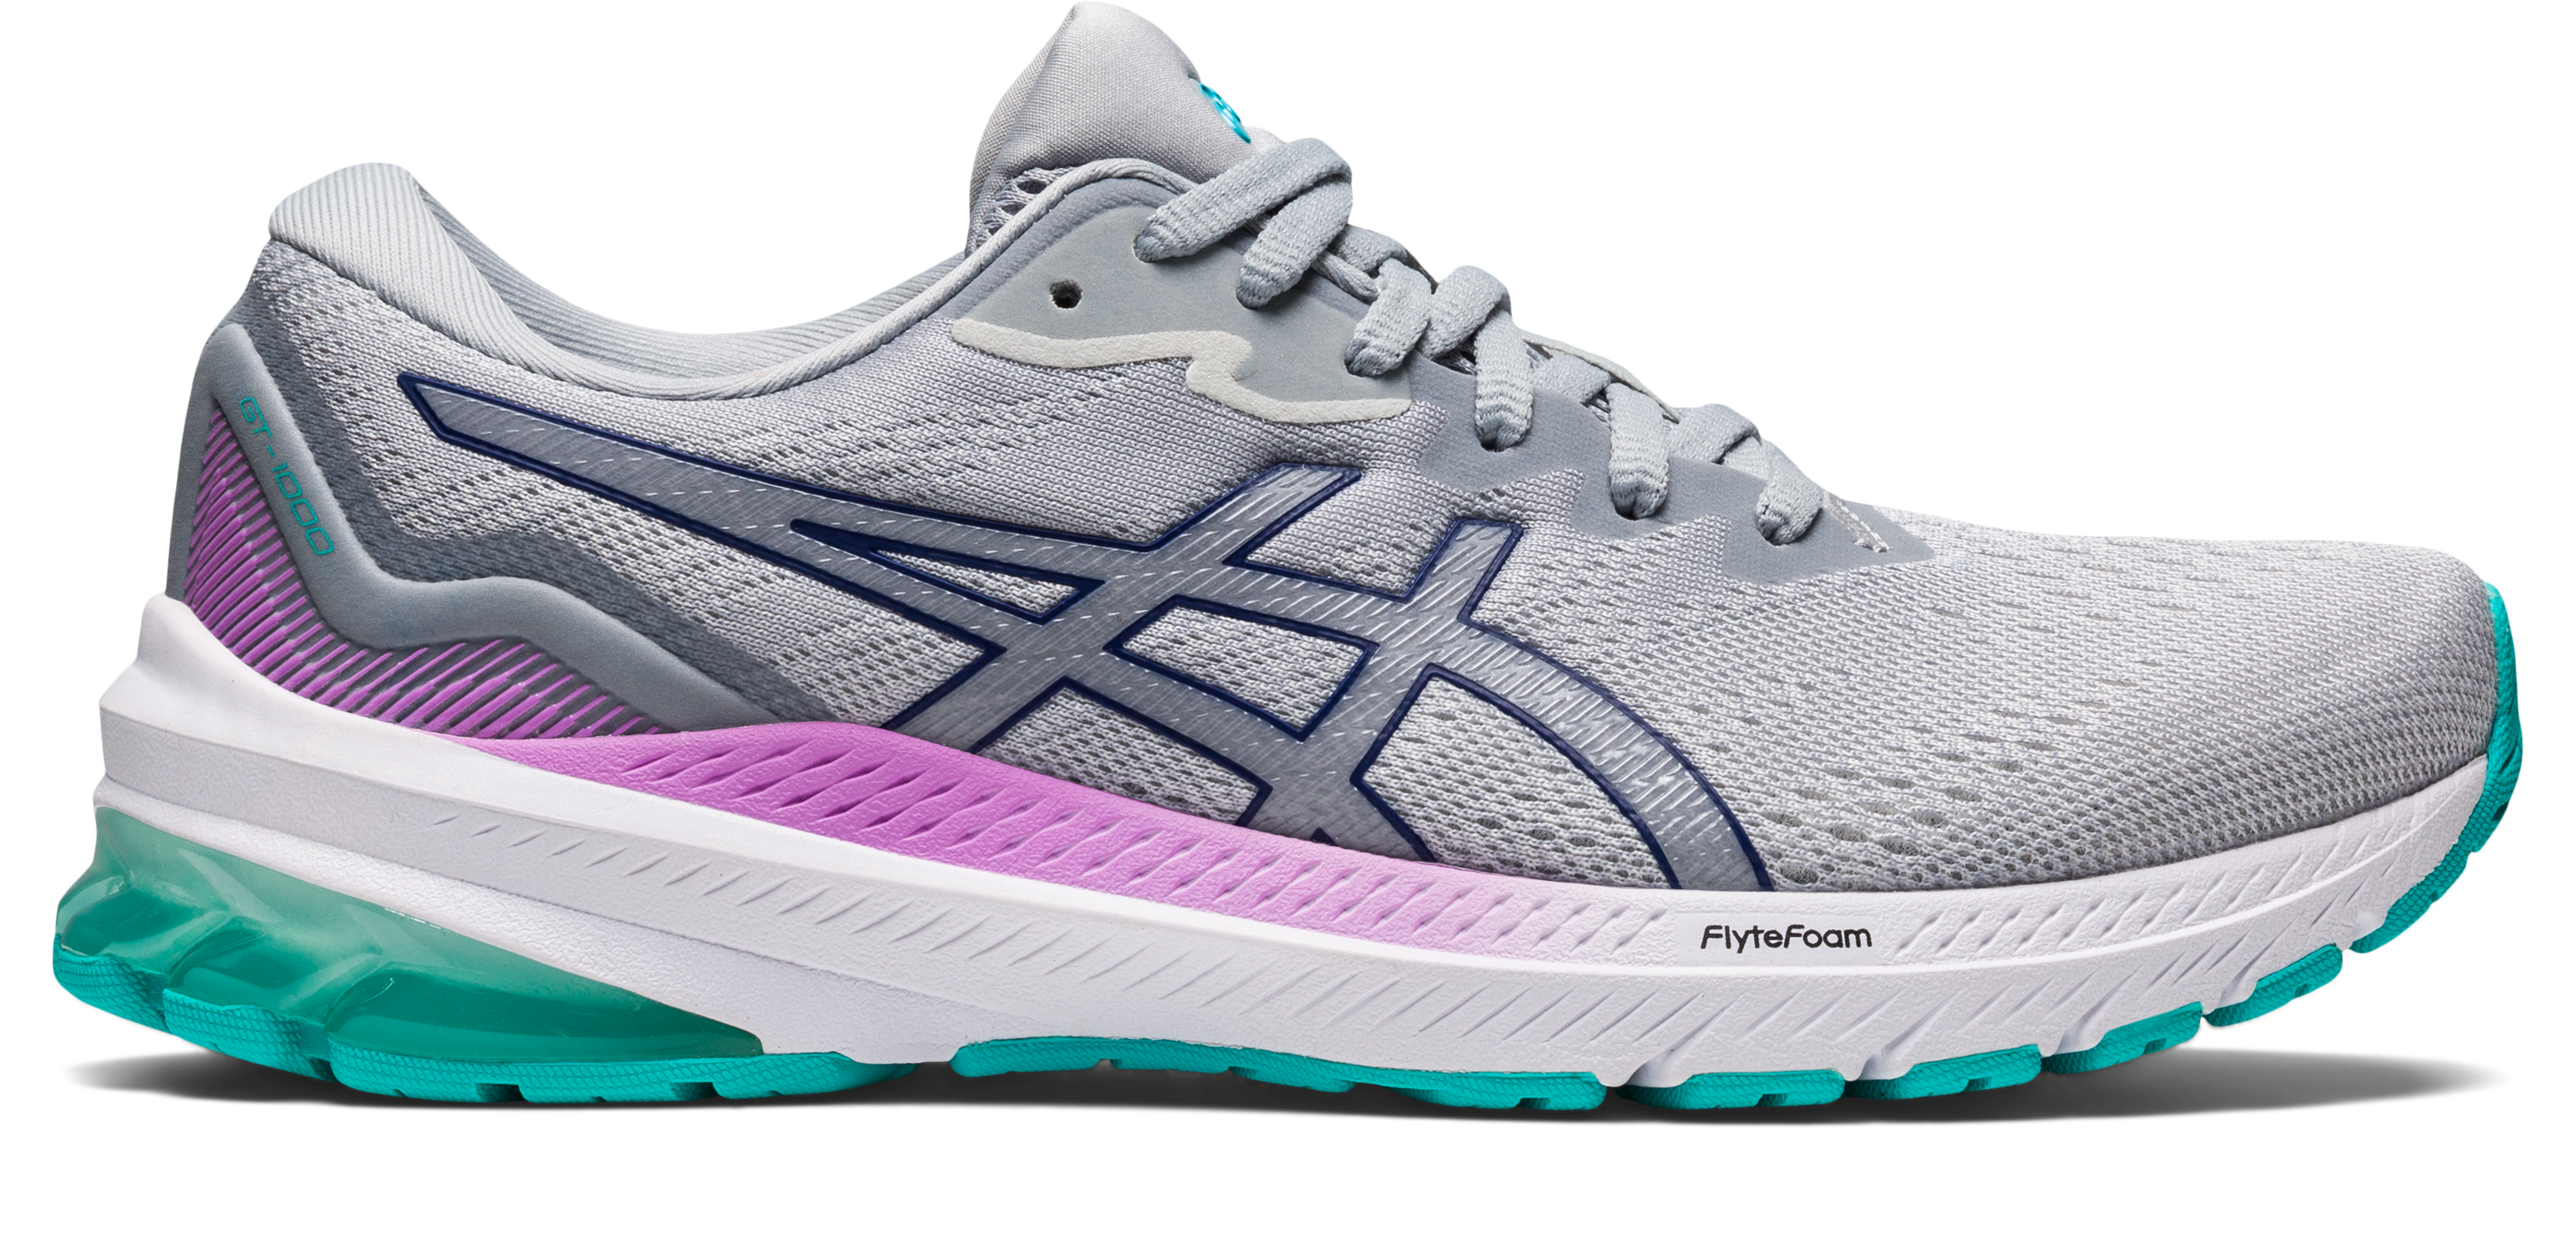 Asics Women's GT-1000 11 Running Shoes in Glacier Grey/Dive Blue